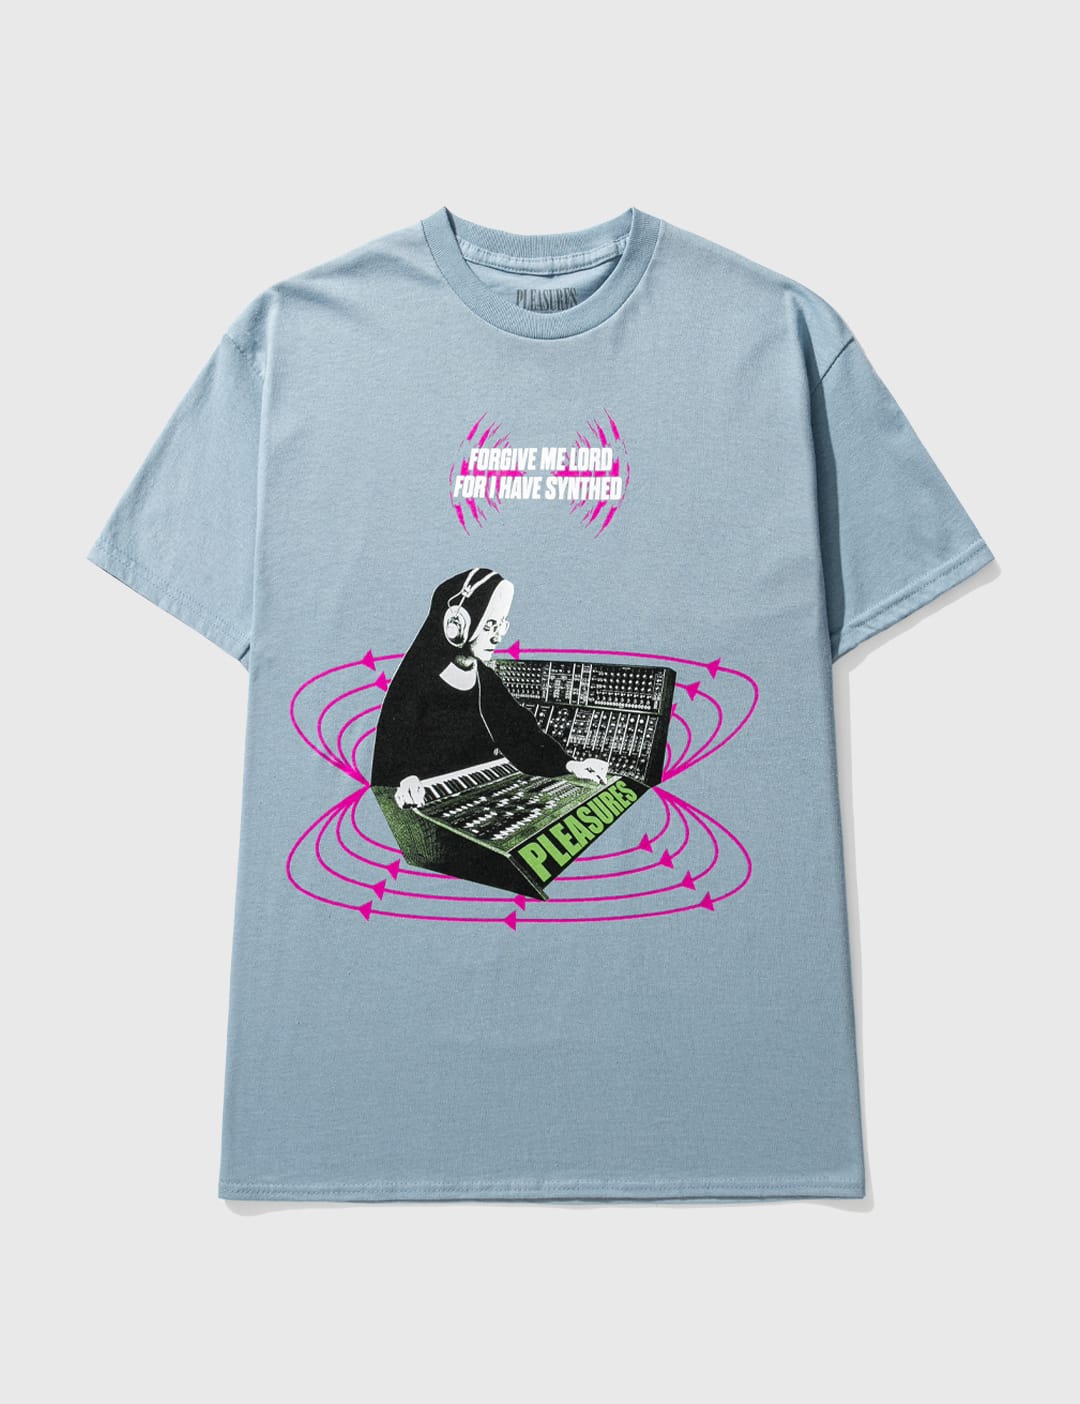 Pleasures - Synth T-shirt | HBX - Globally Curated Fashion and ...